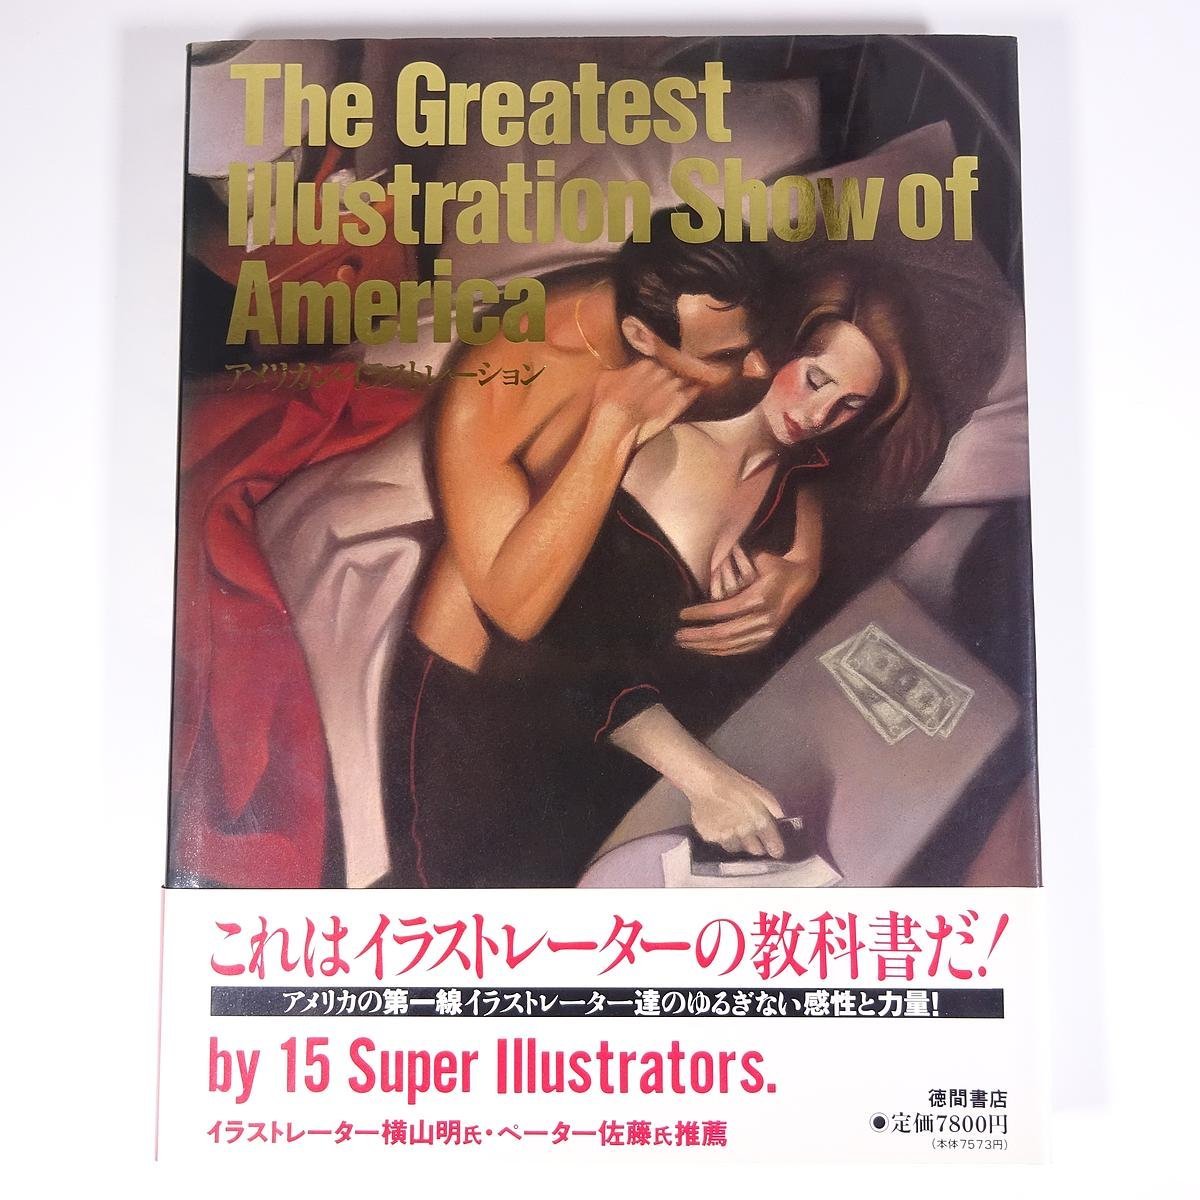 [ postage 800 jpy ] The Greatest Illustration Show of America american * illustration ration virtue interval bookstore 1992 large this drawing version llustrated book picture book of paintings in print 